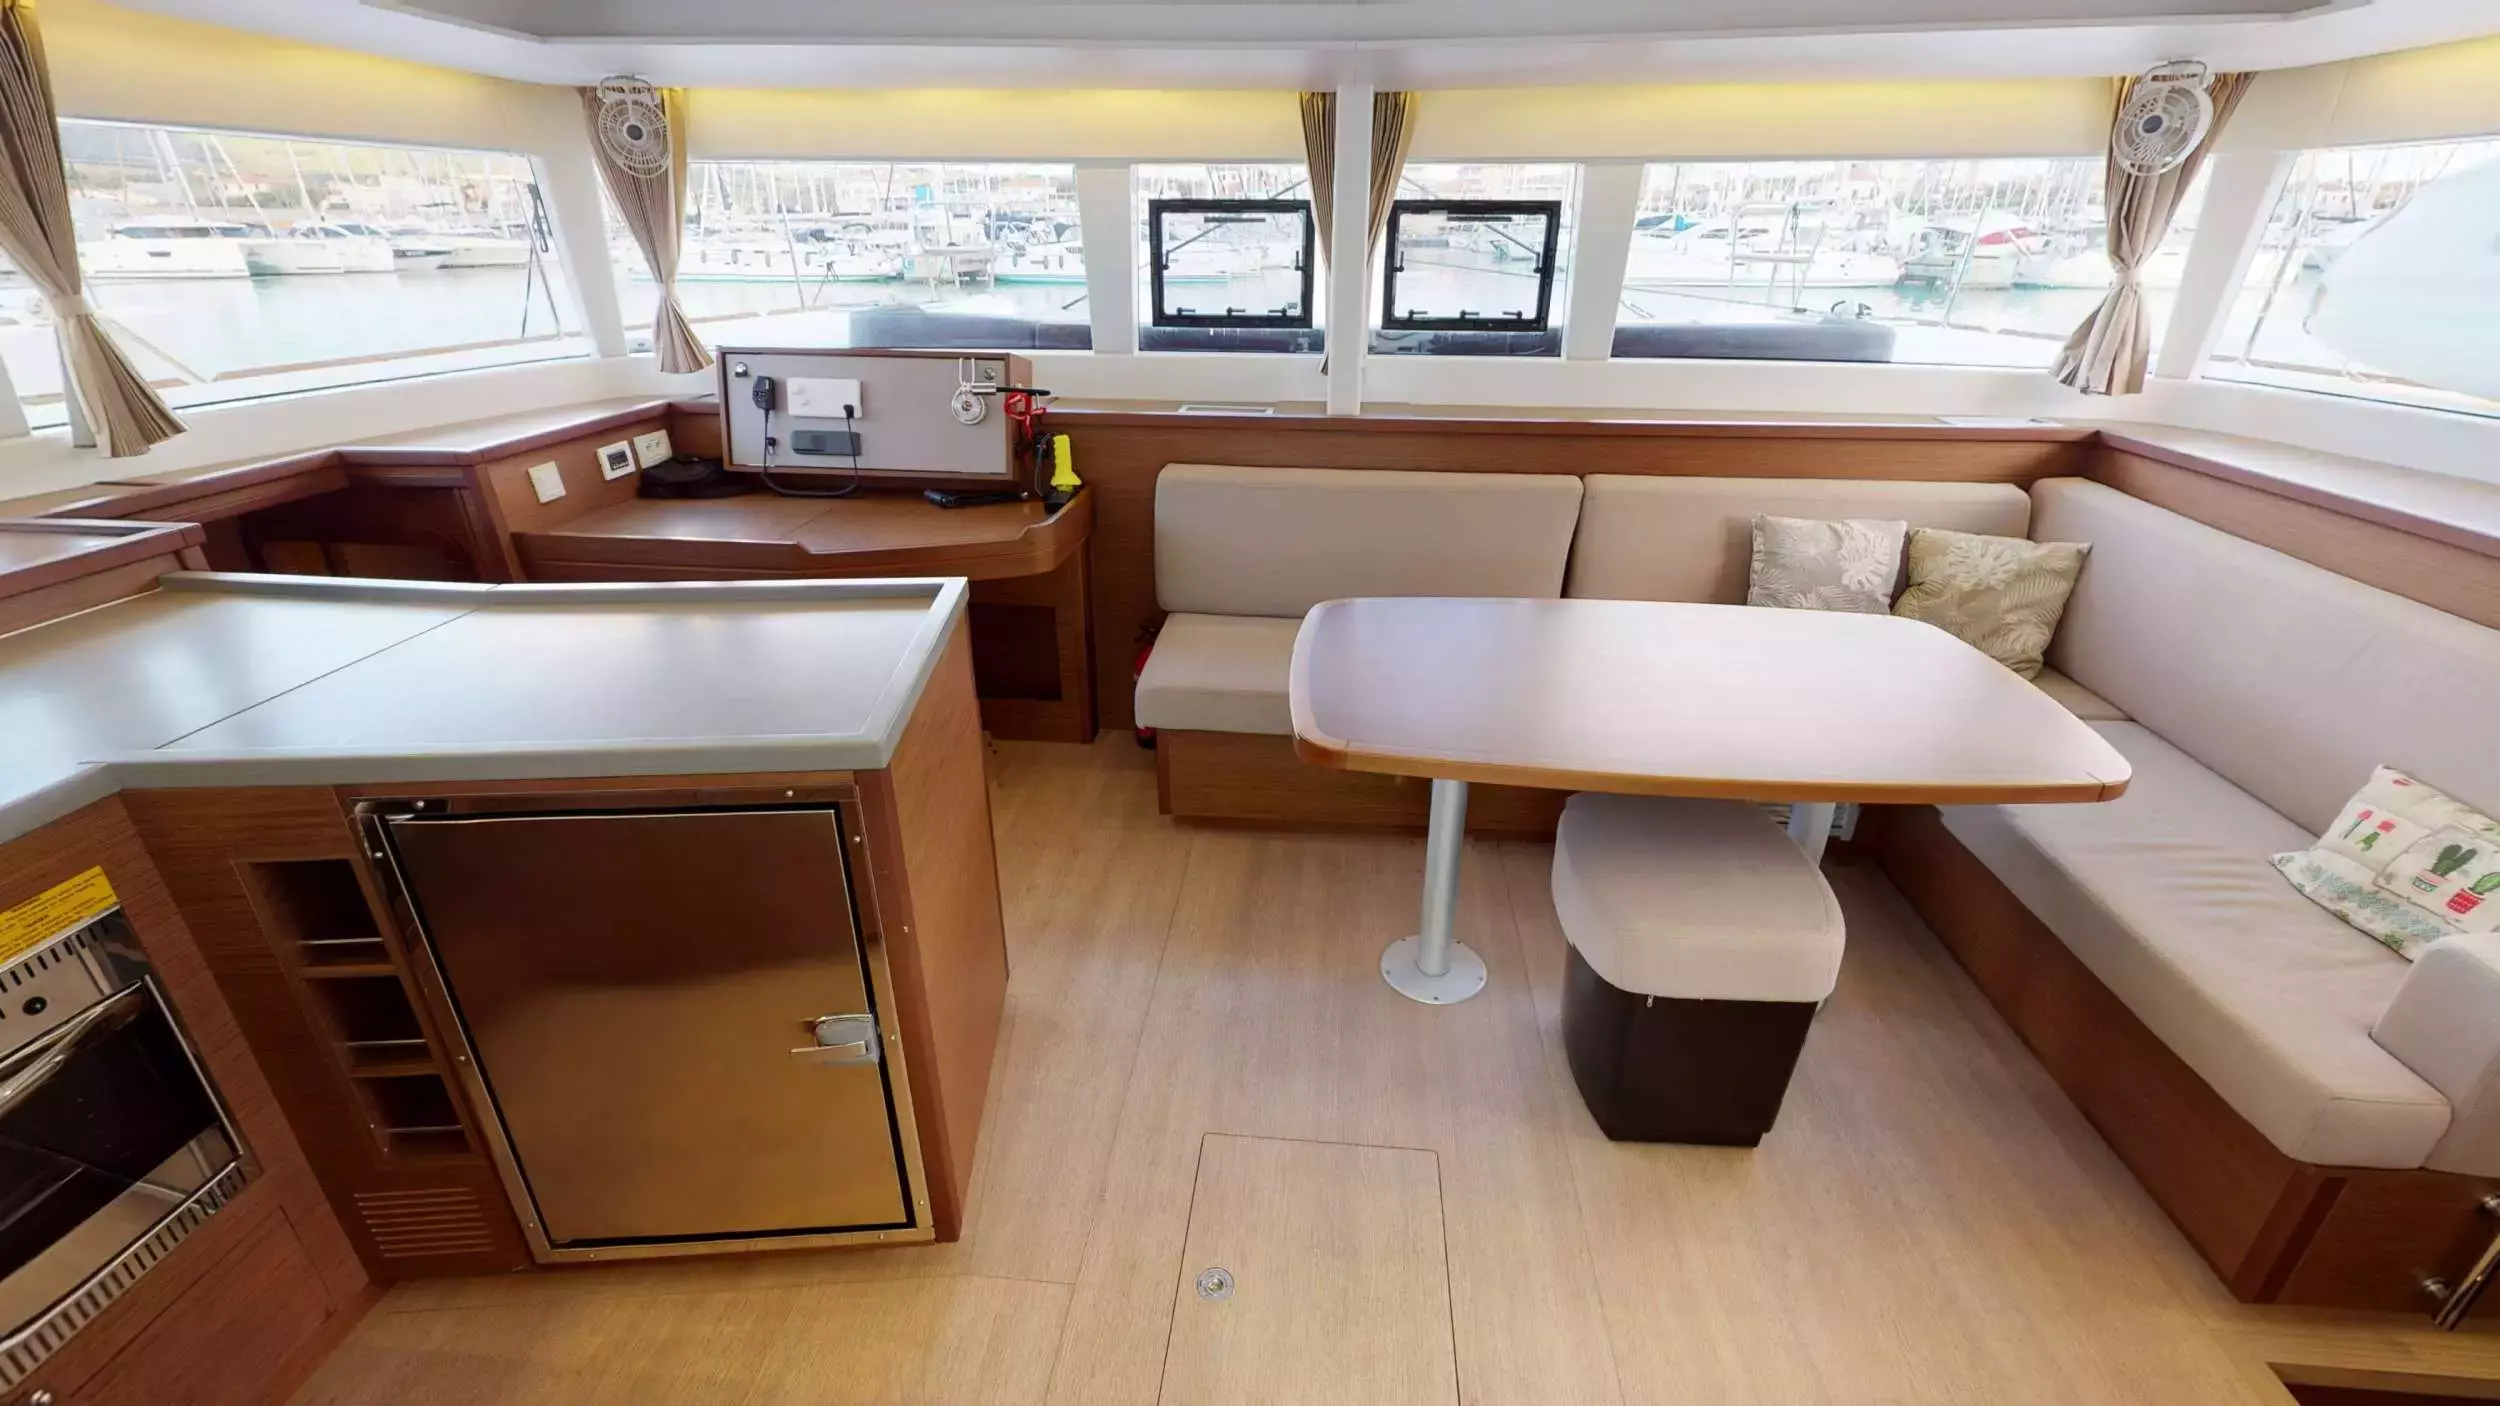 Arp by Lagoon - Top rates for a Rental of a private Sailing Catamaran in Italy